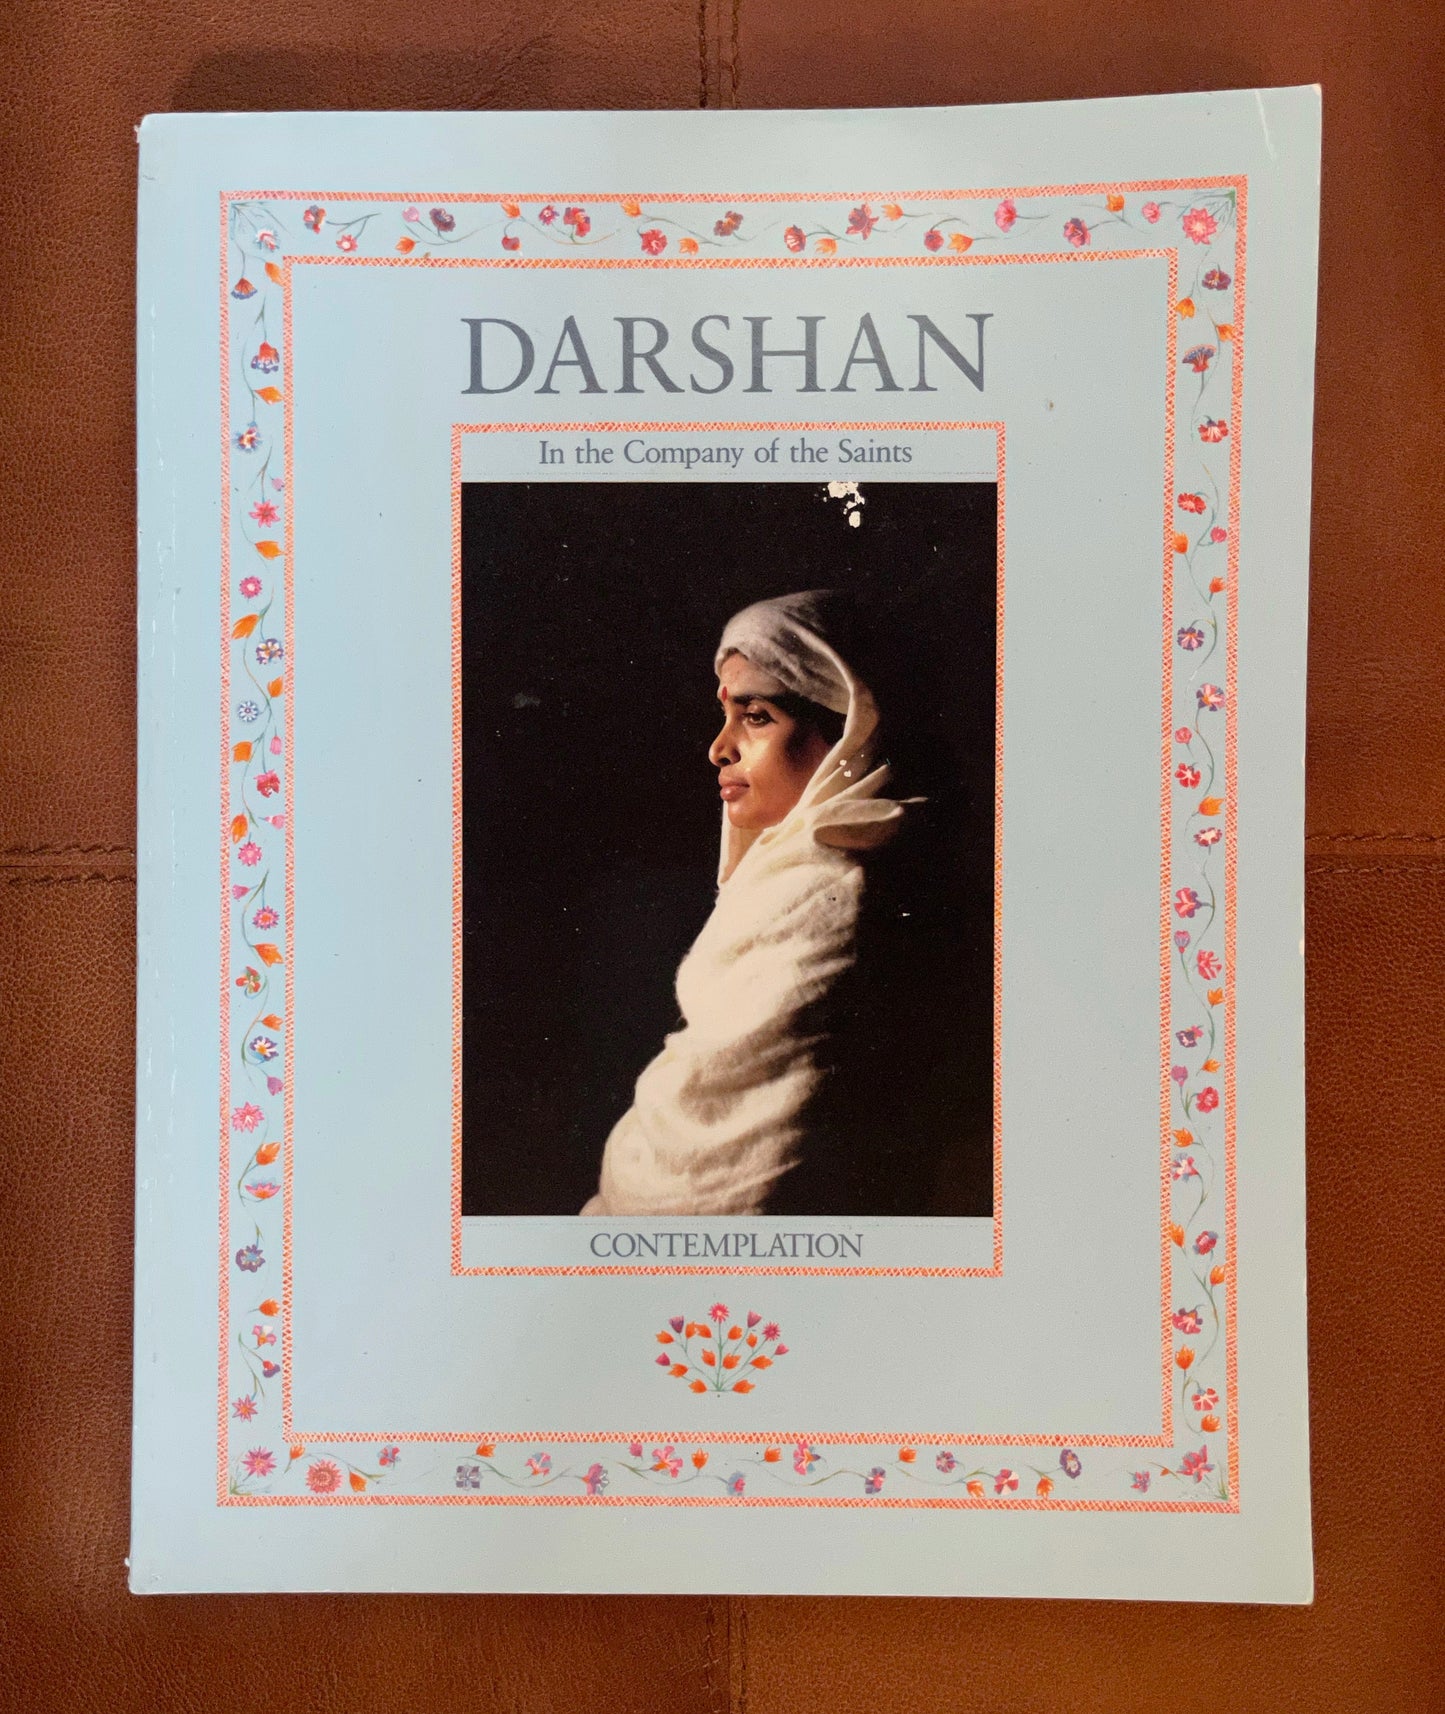 Darshan Magazine, In The Company of The Saints, Contemplation